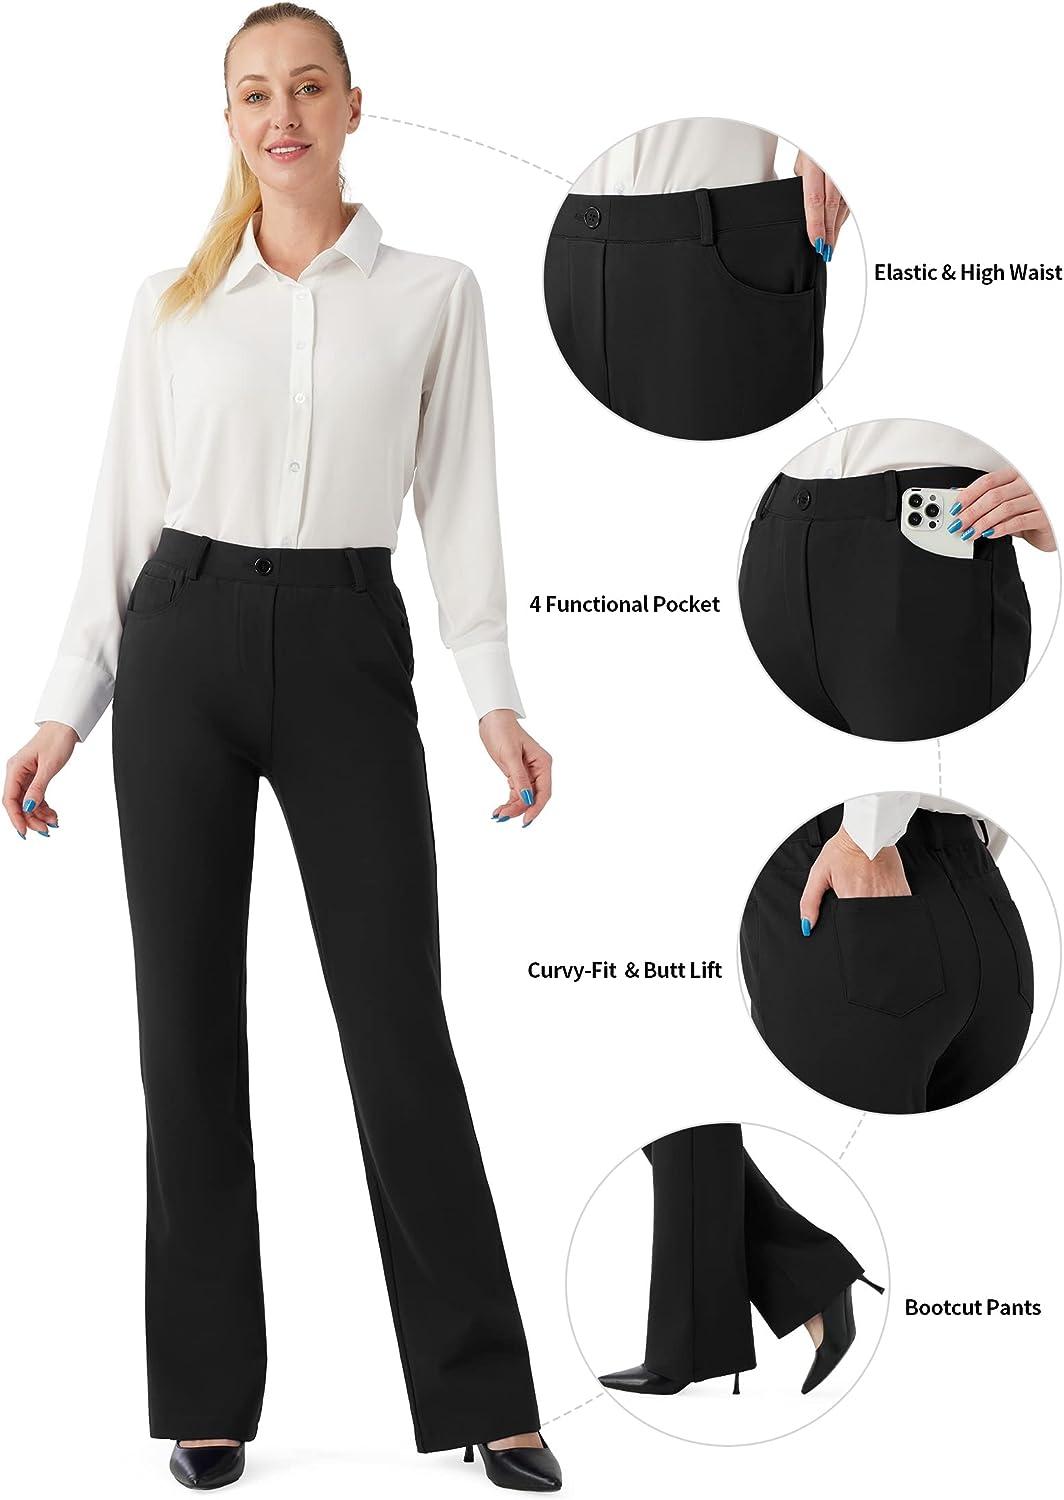 Women Trousers & pants in a various styles supplier